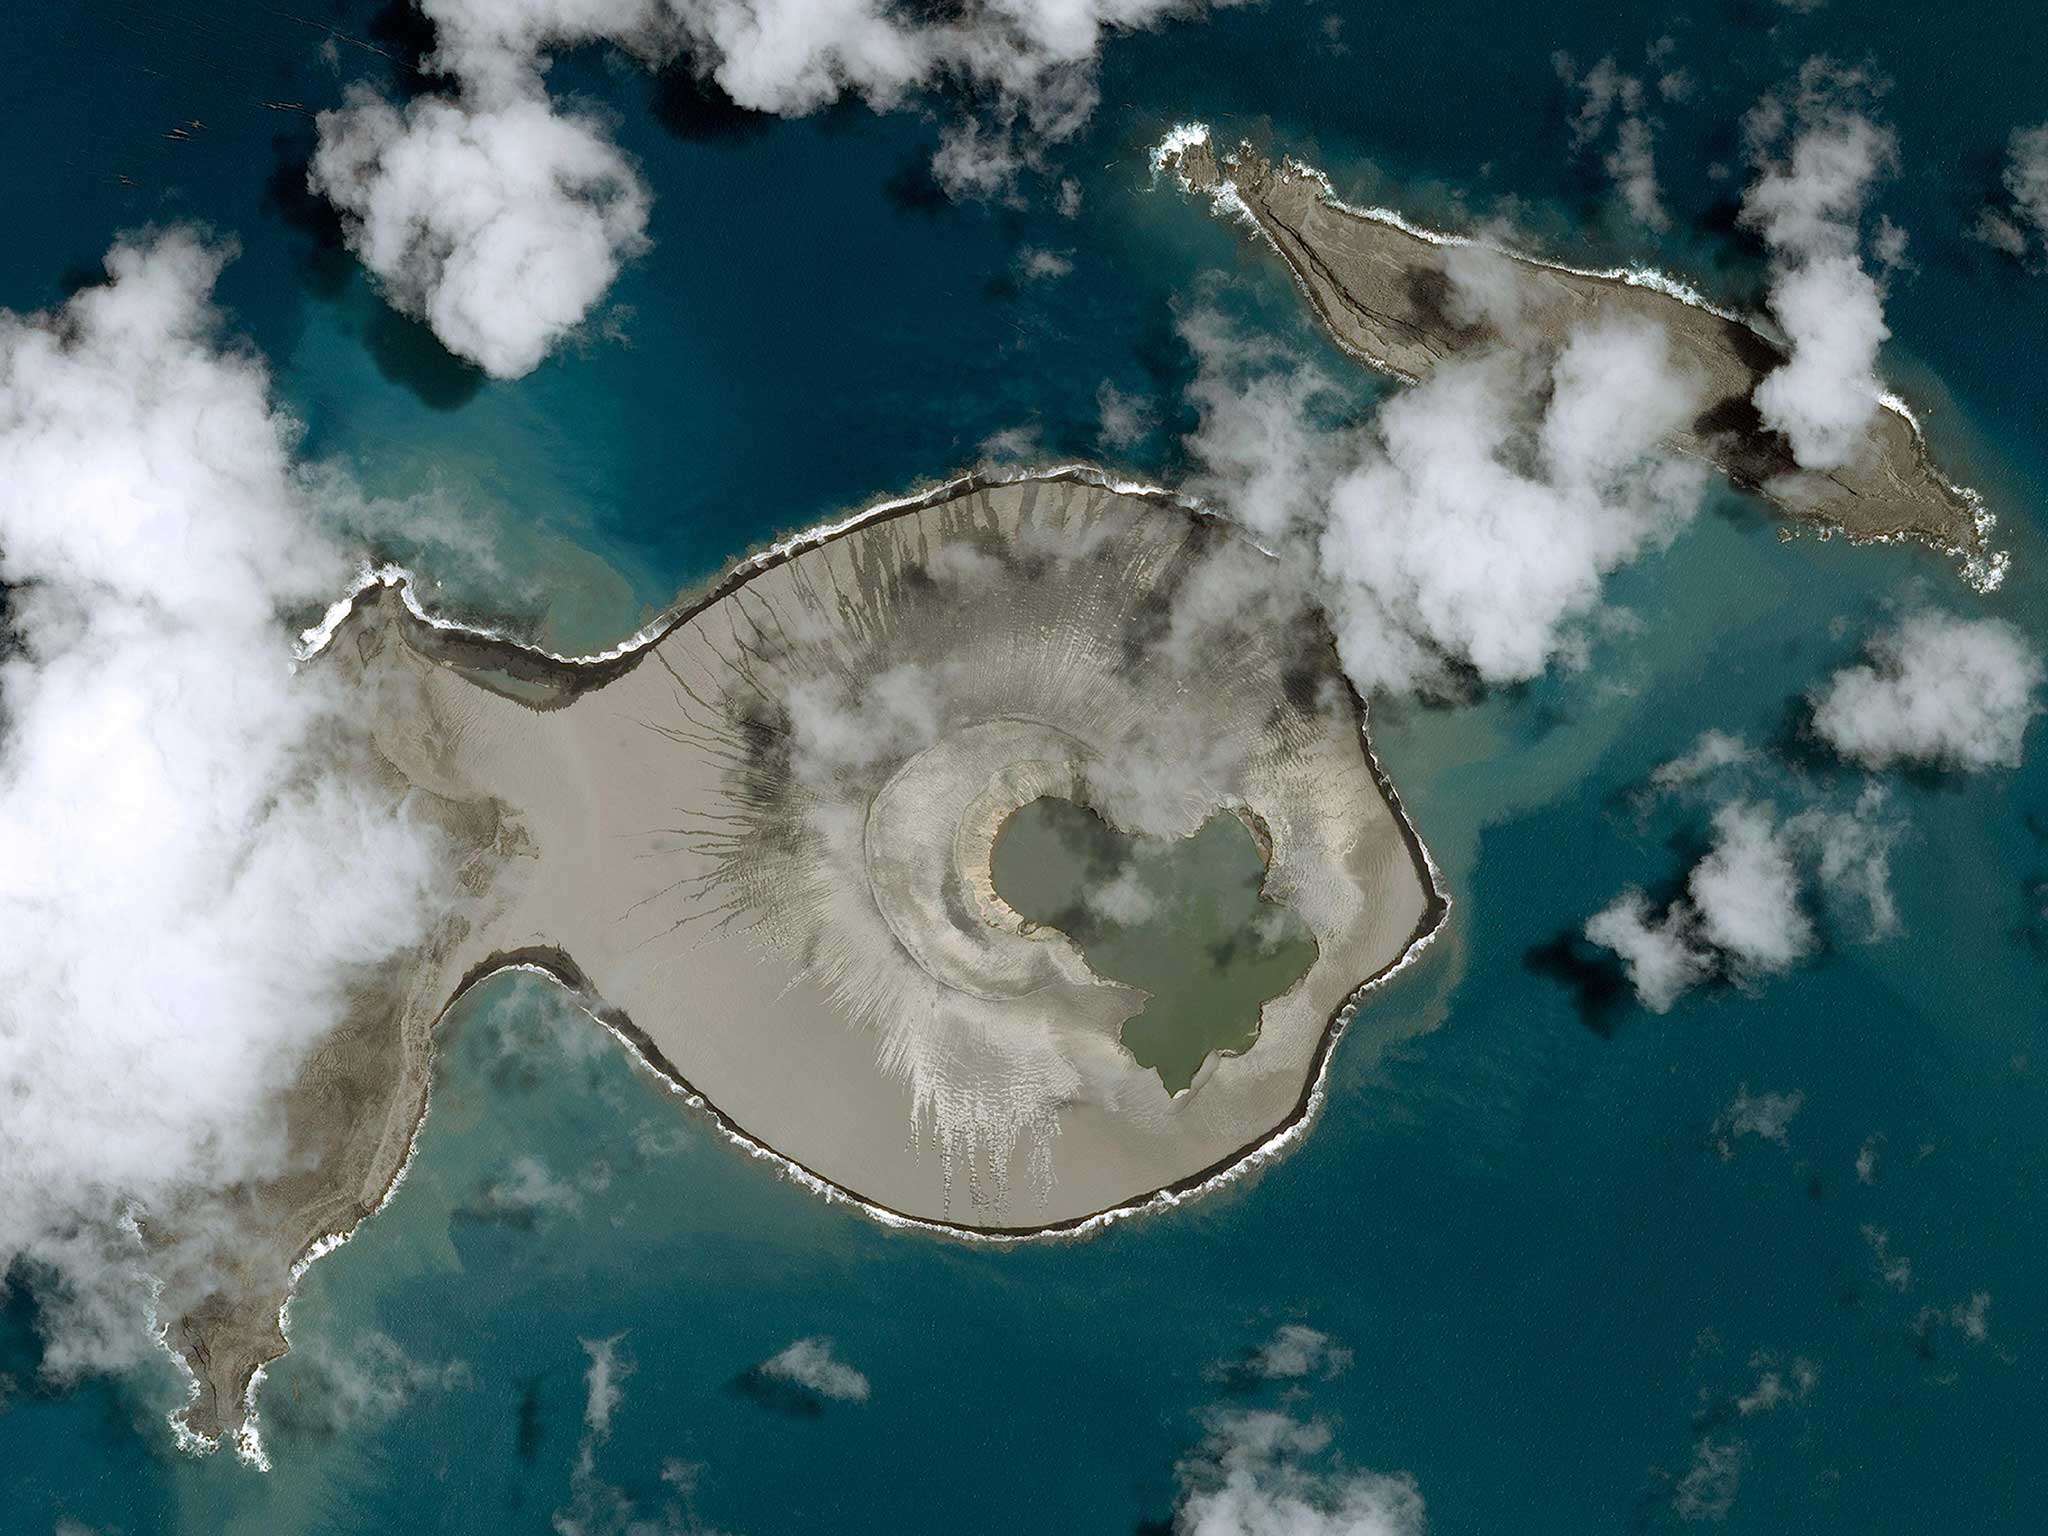 A new island has been formed